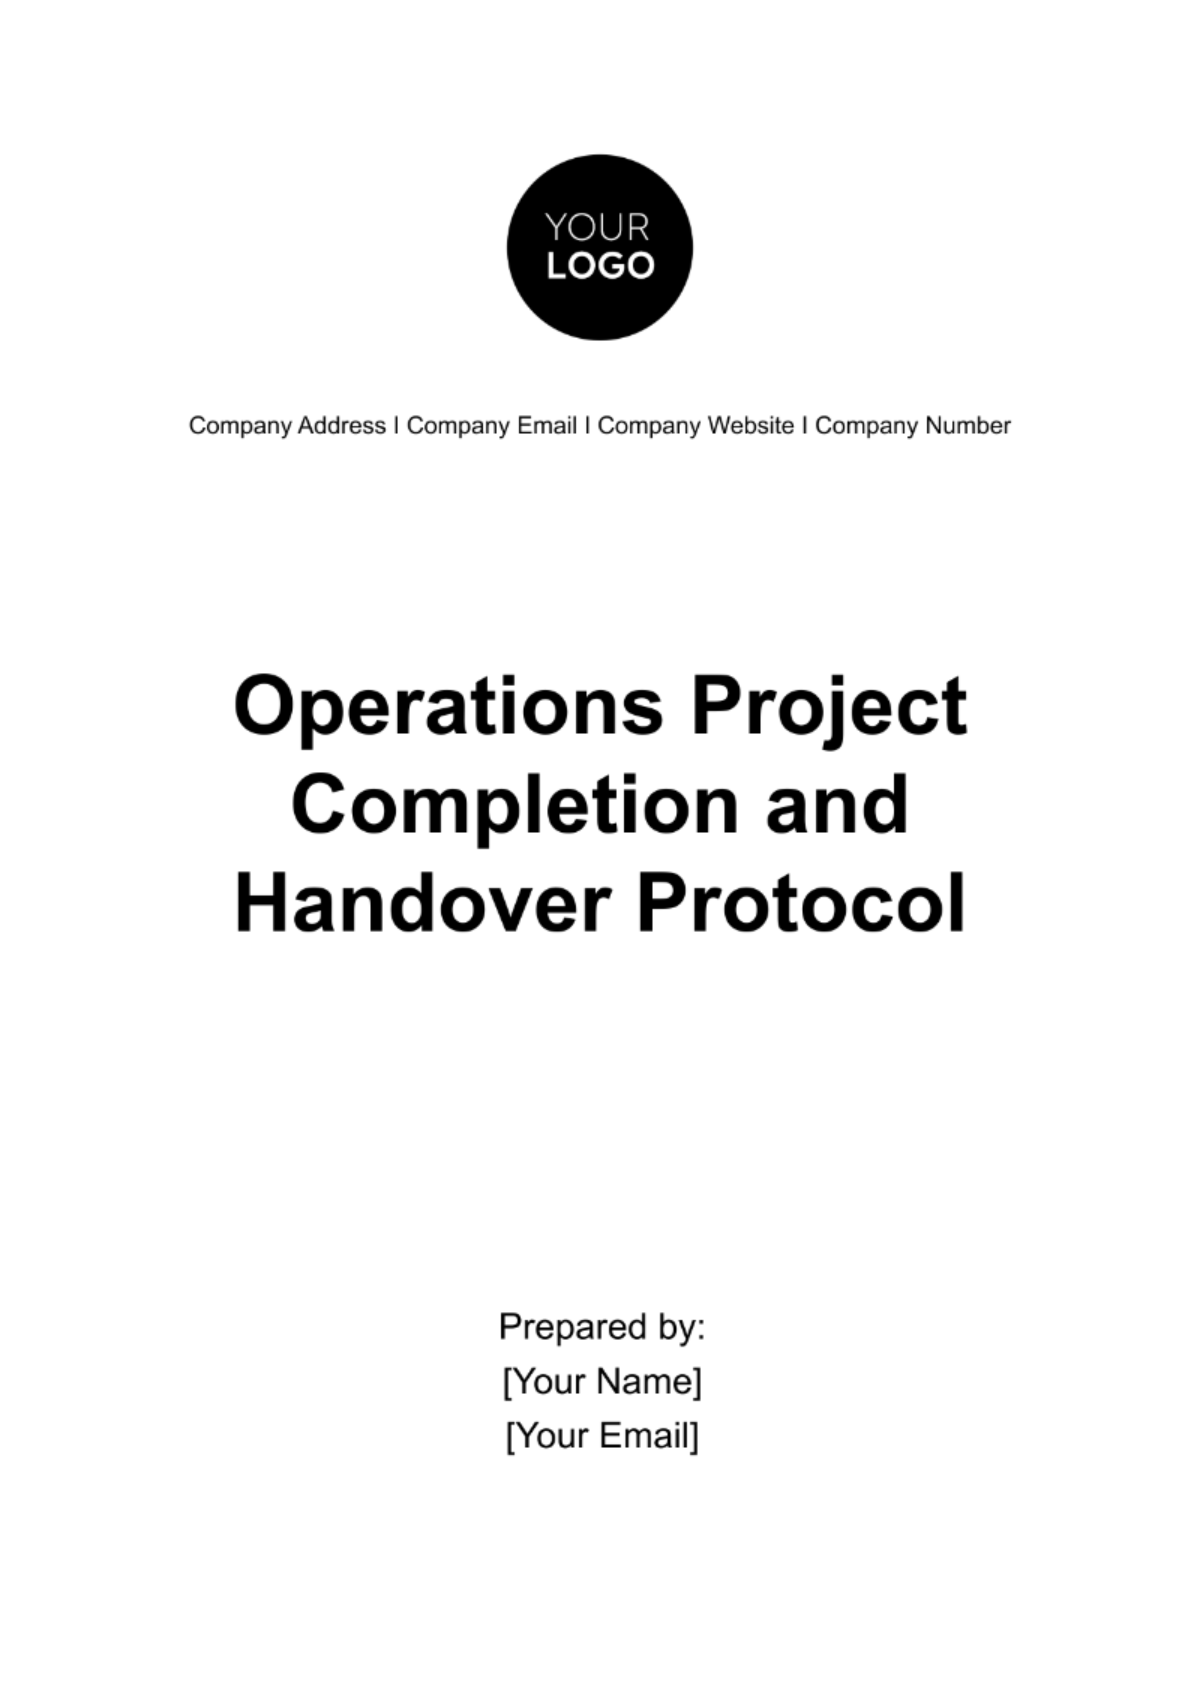 Operations Project Completion and Handover Protocol Template